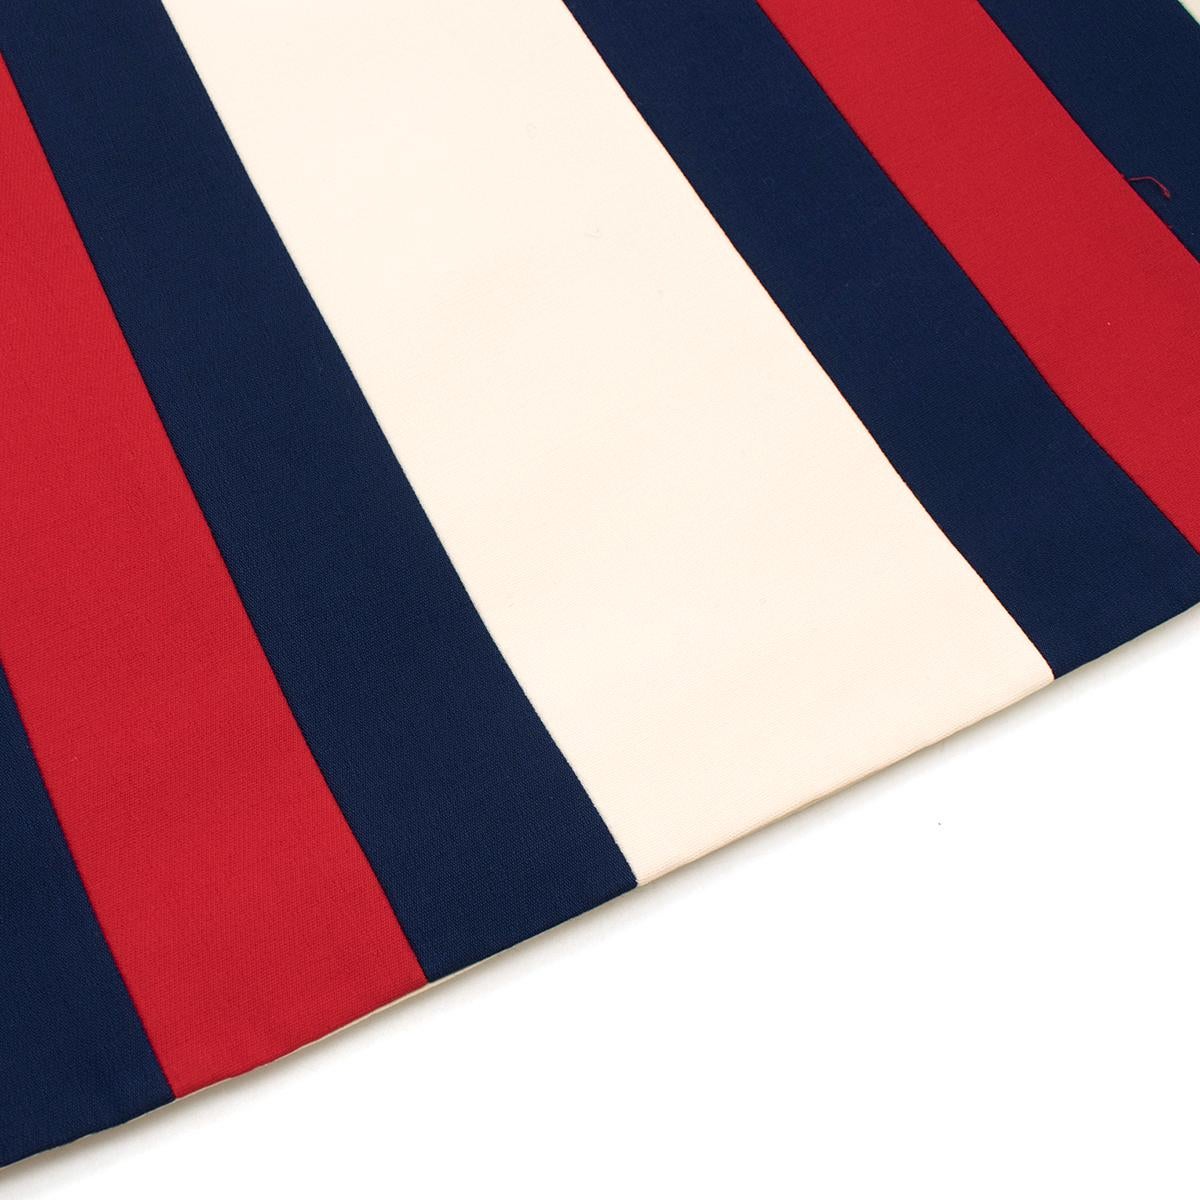 Women's Gucci Signature blue and red Striped crepe skirt US 4